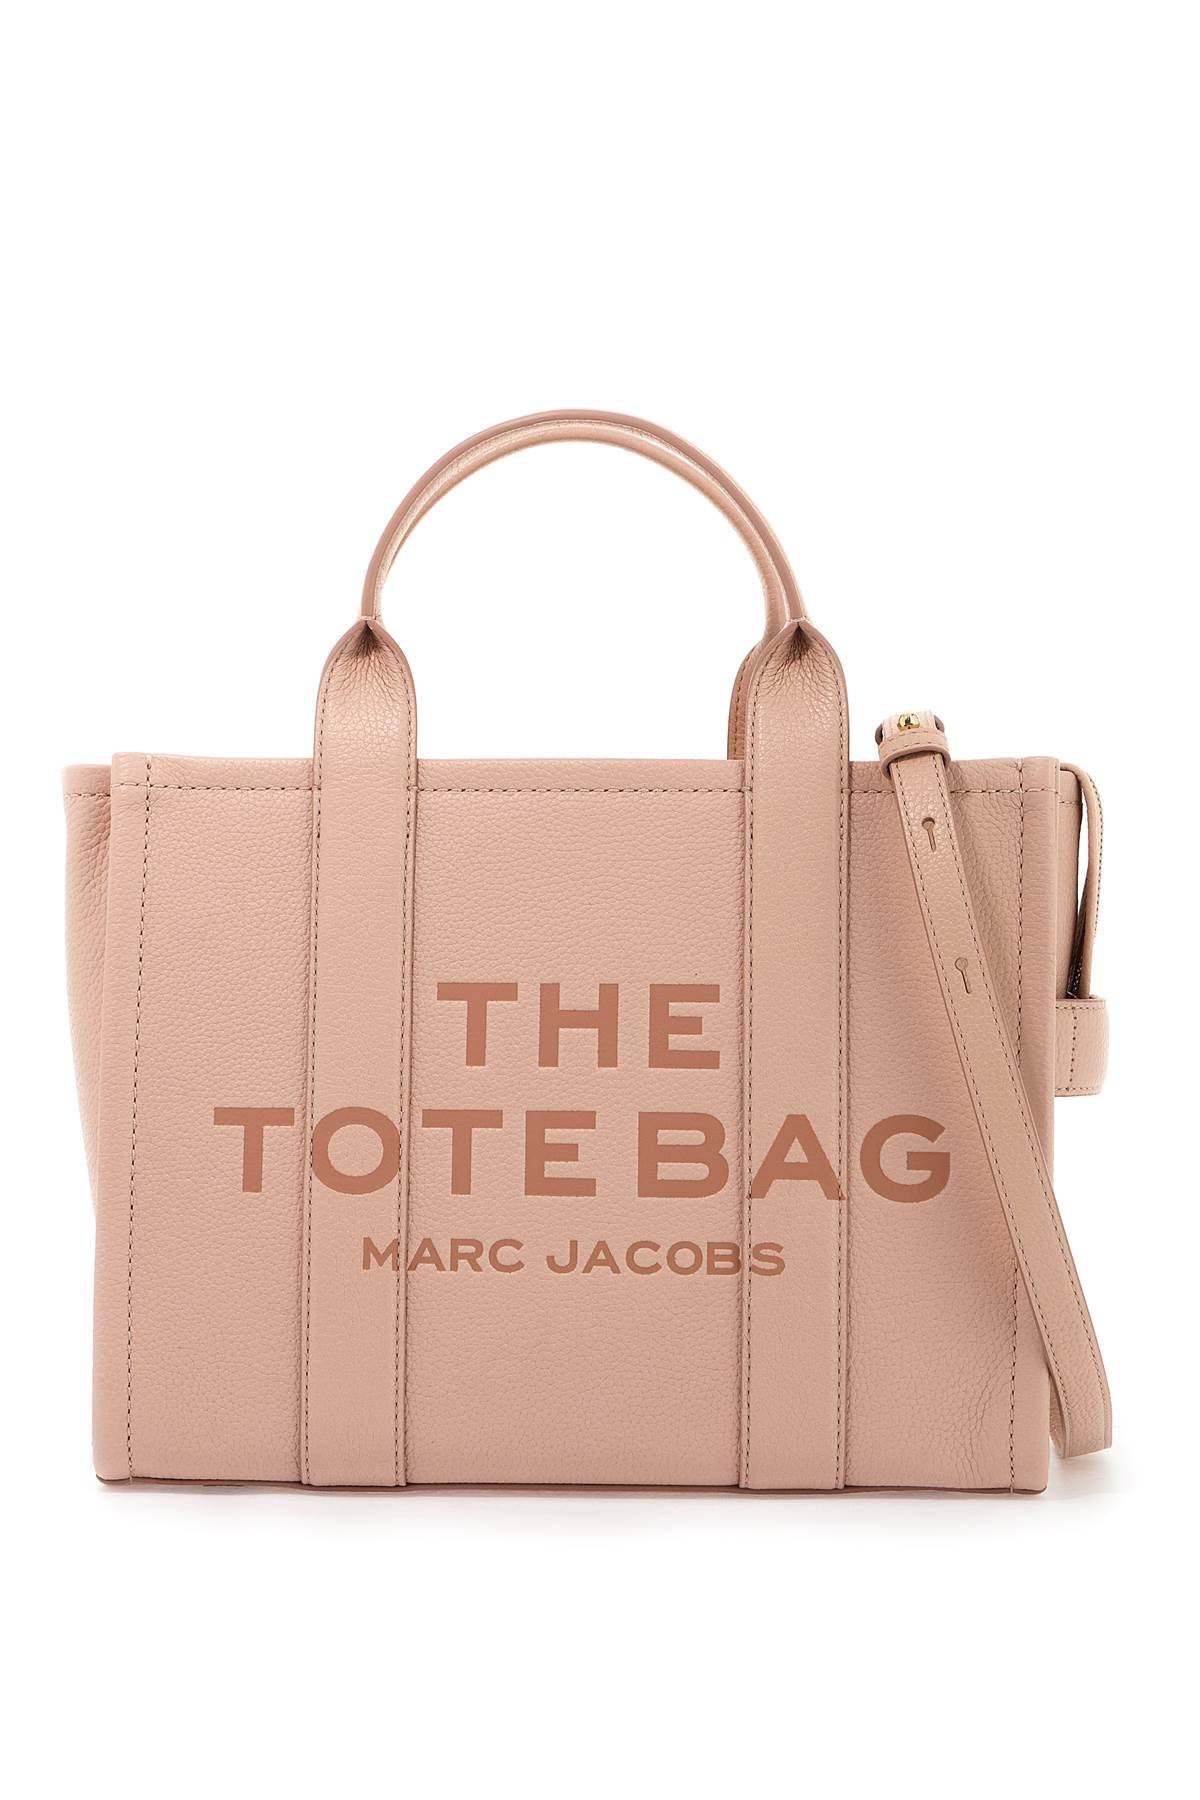 Marc Jacobs The Leather Medium Tote Bag   Pink